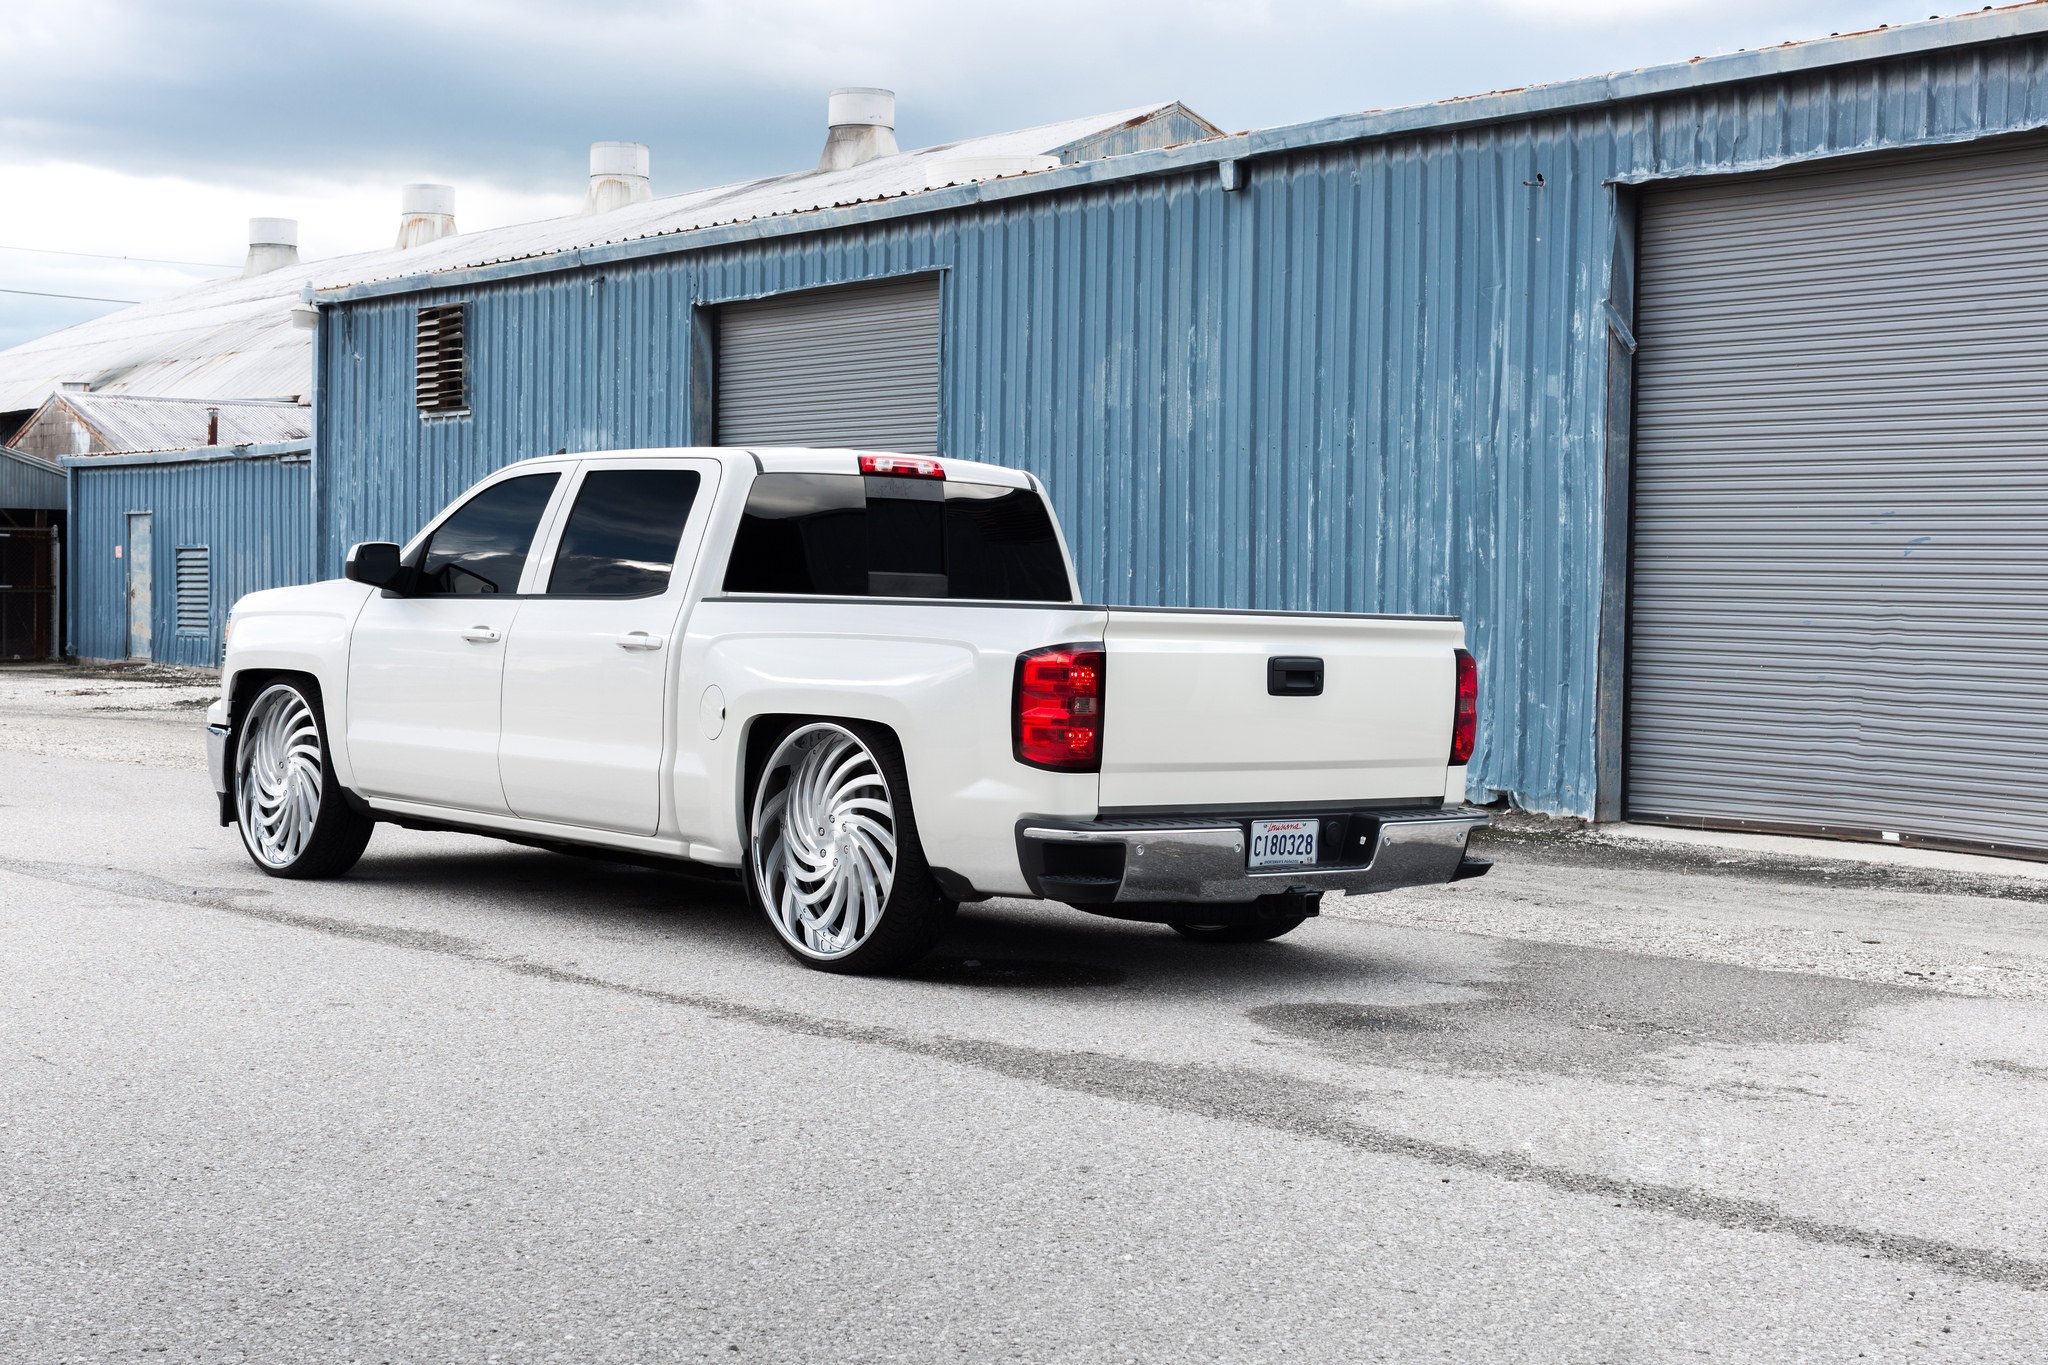 Red LED Taillights on White Chevy Silverado - Photo by Dub Wheels